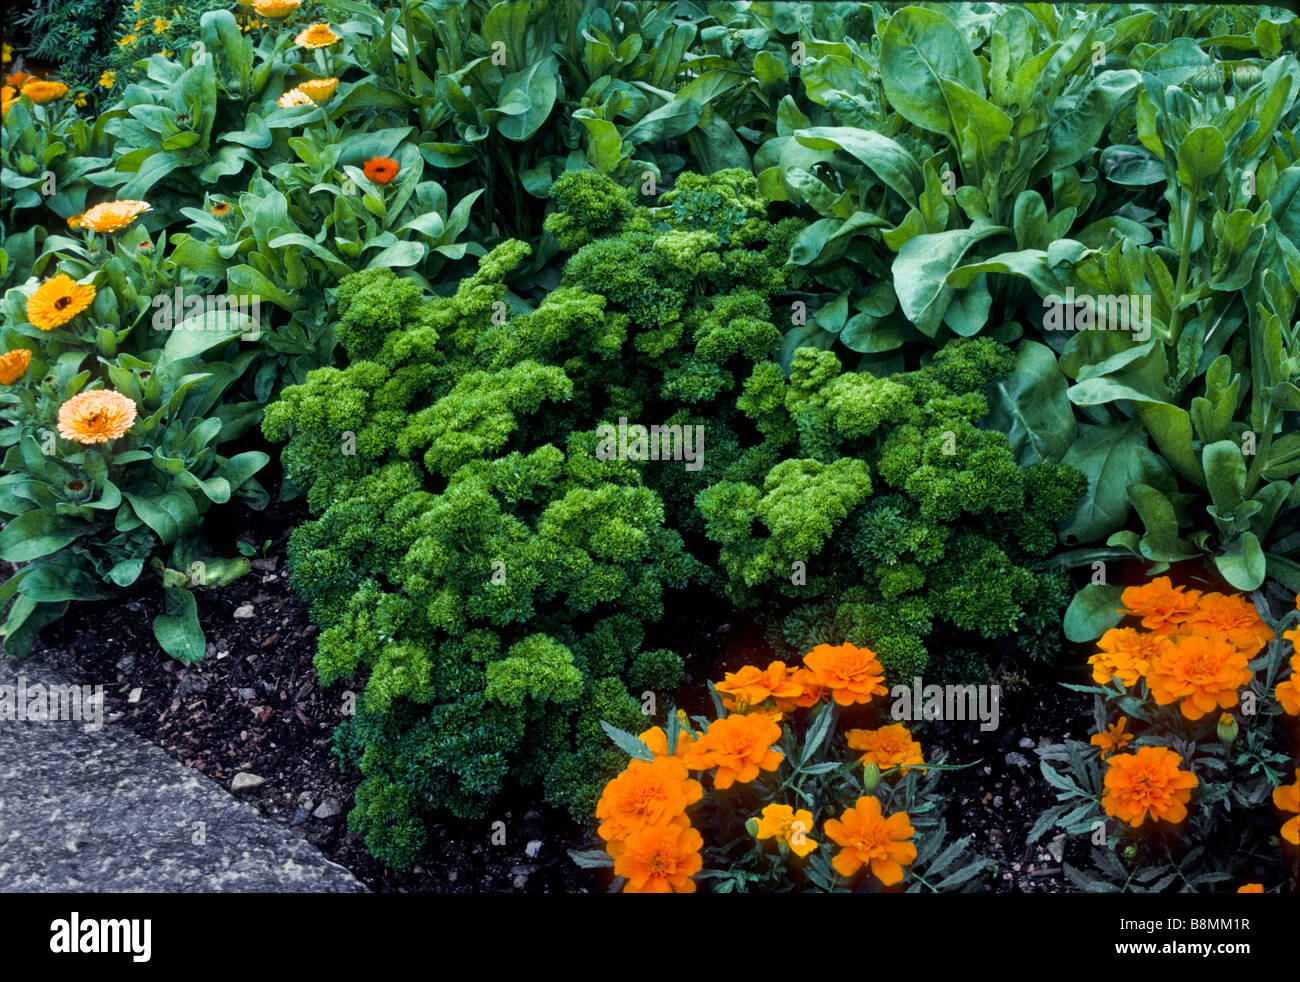 Herb garden with parsley, pot marigold, sage, and marigold. Stock Photo